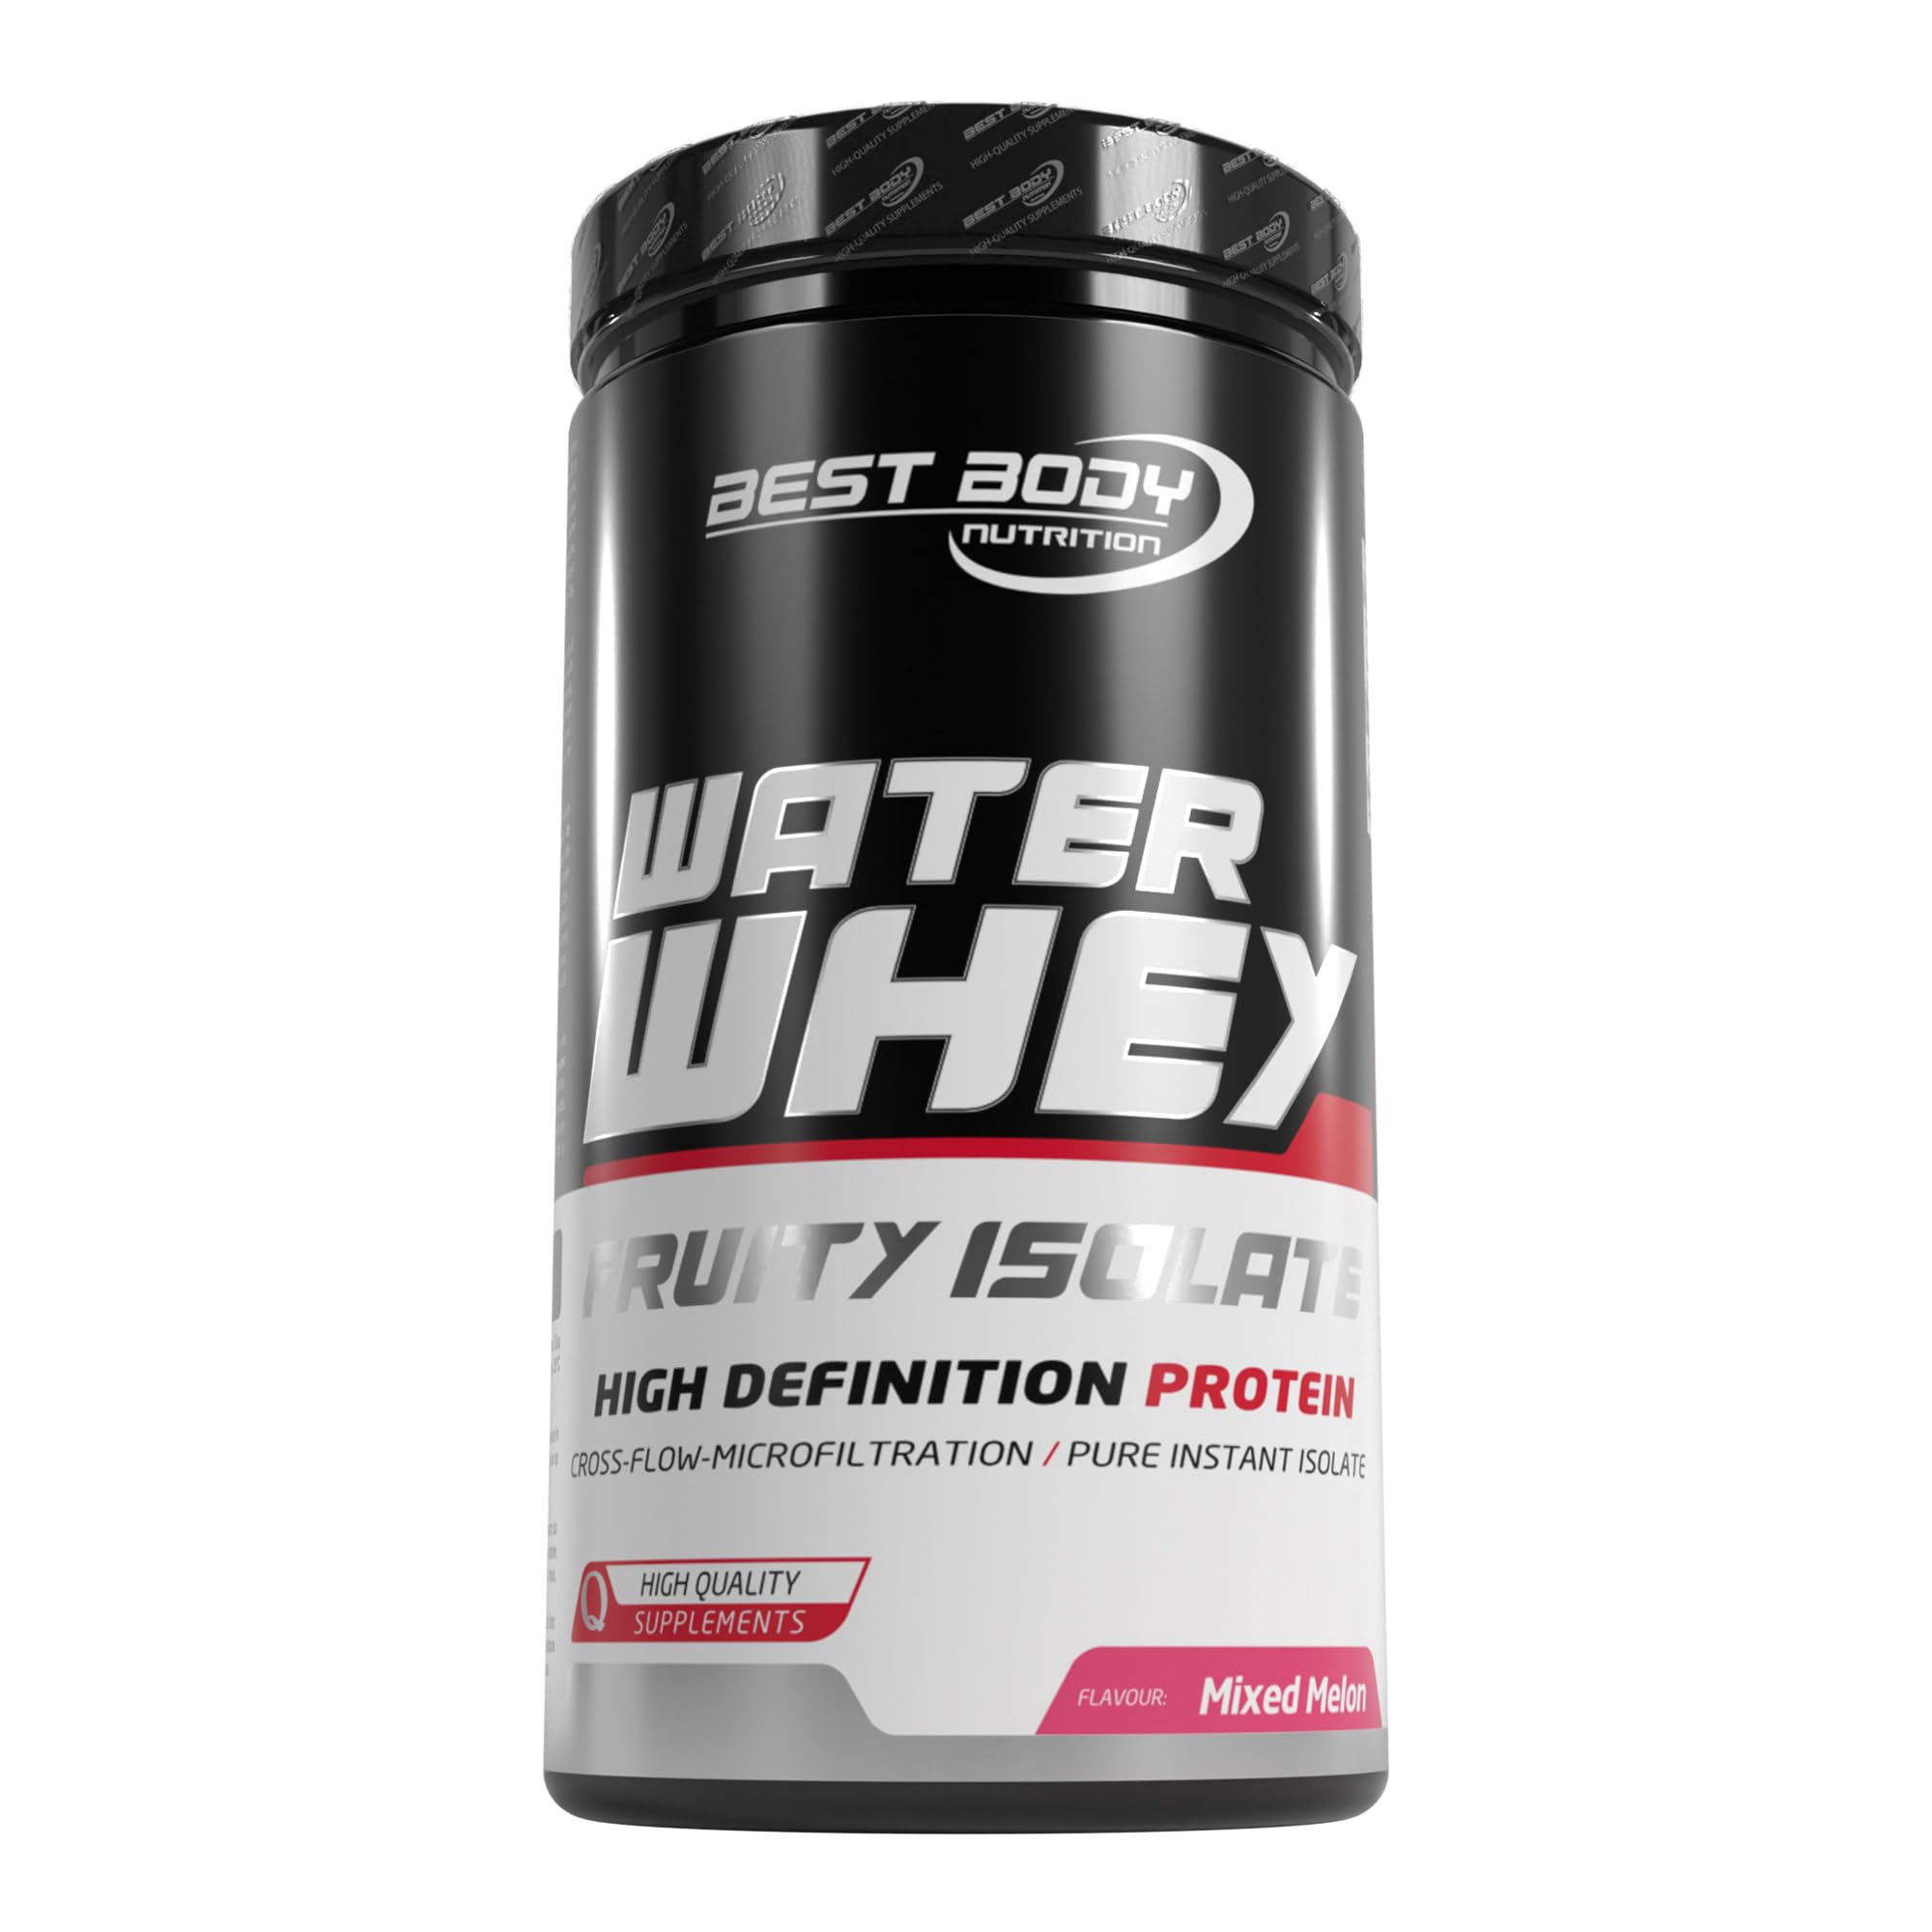 Best Body Nutrition - Professional Water Whey Fruity Isolate - High Definition Whey Protein Isolate - Mixed Melon - 460 g Dose